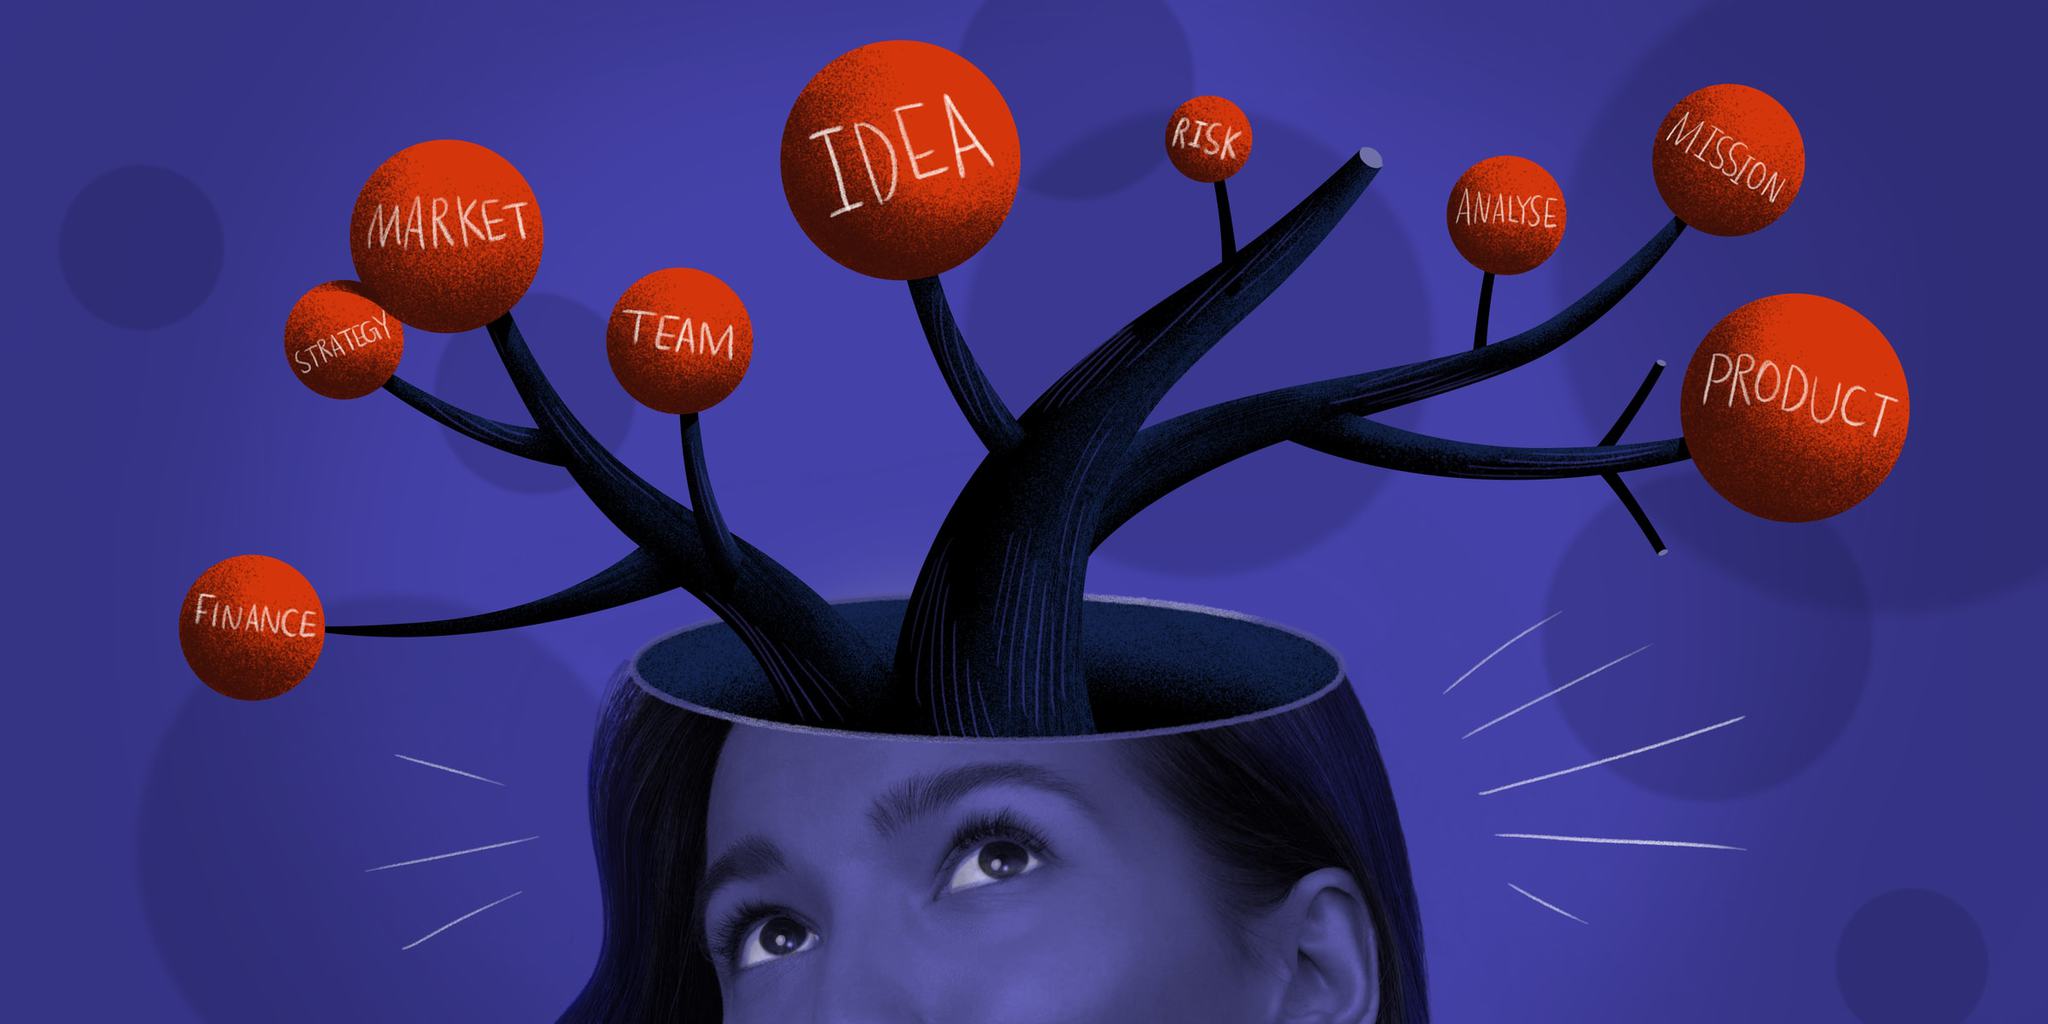 Steps To Evaluating Your Business Idea